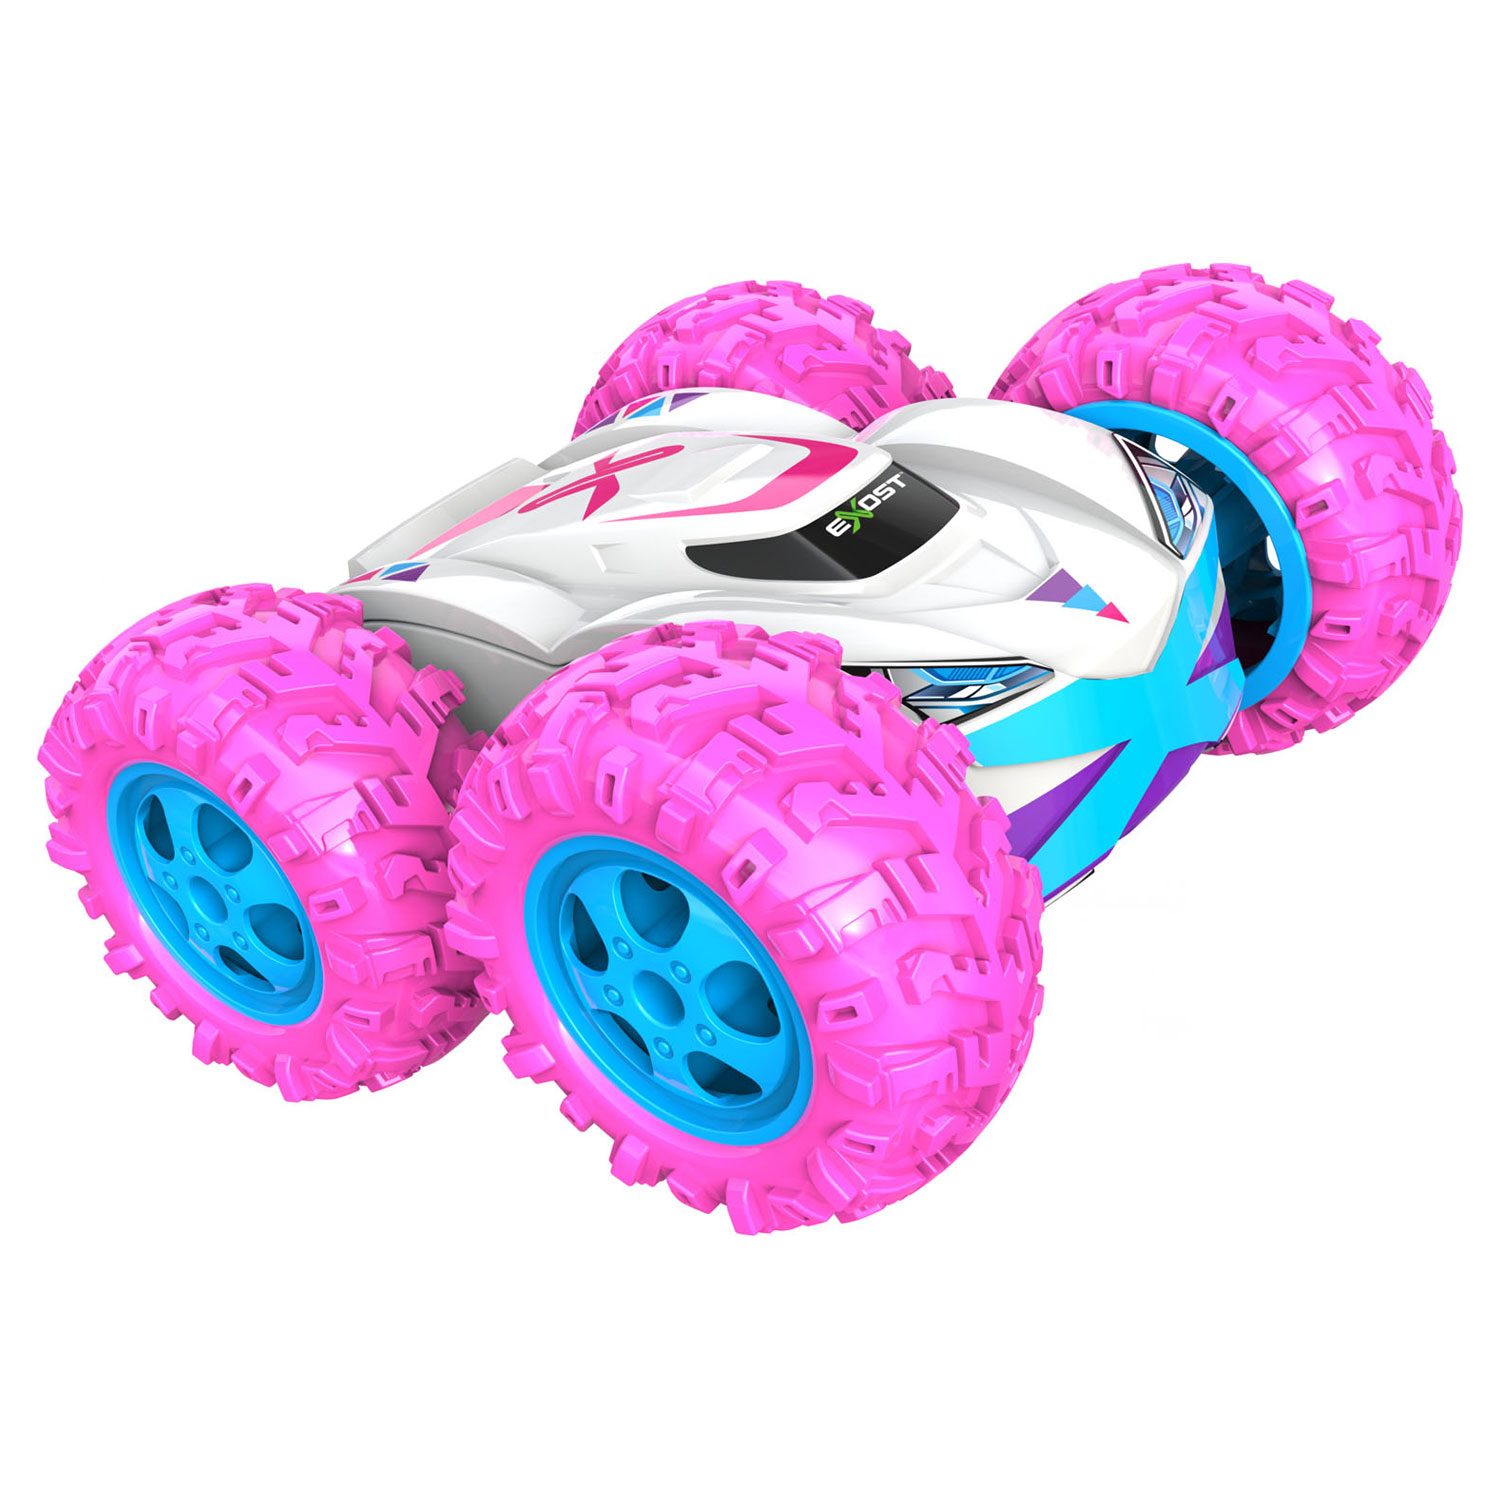 360 Cross Exost, remote-controlled car